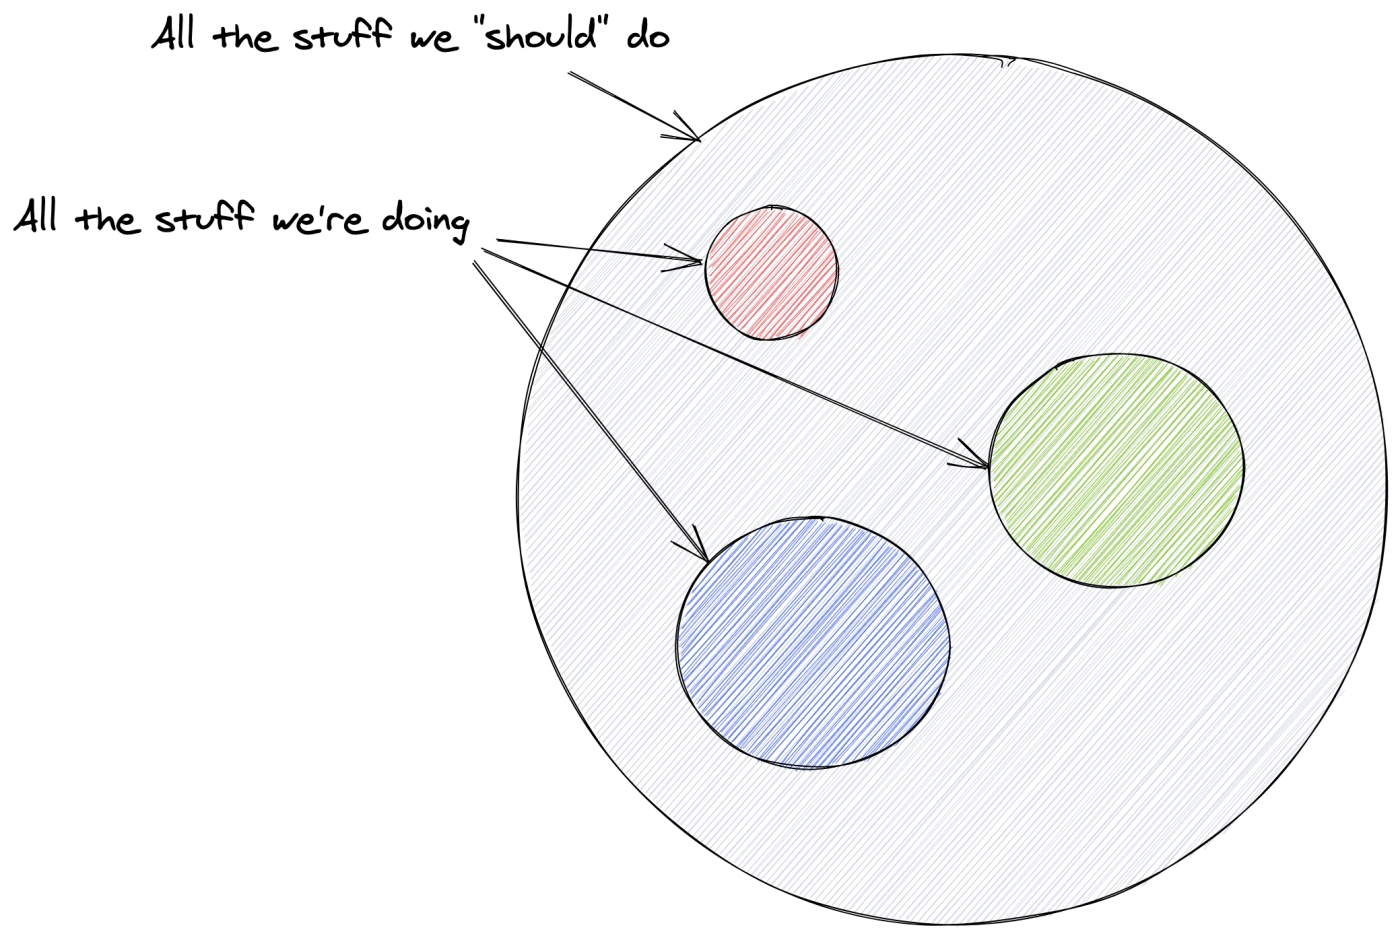 A circle with three circles inside it. The big circle is labeled "All the stuff we 'should' do"; the three small circles are all labeled "All the stuff we're doing."